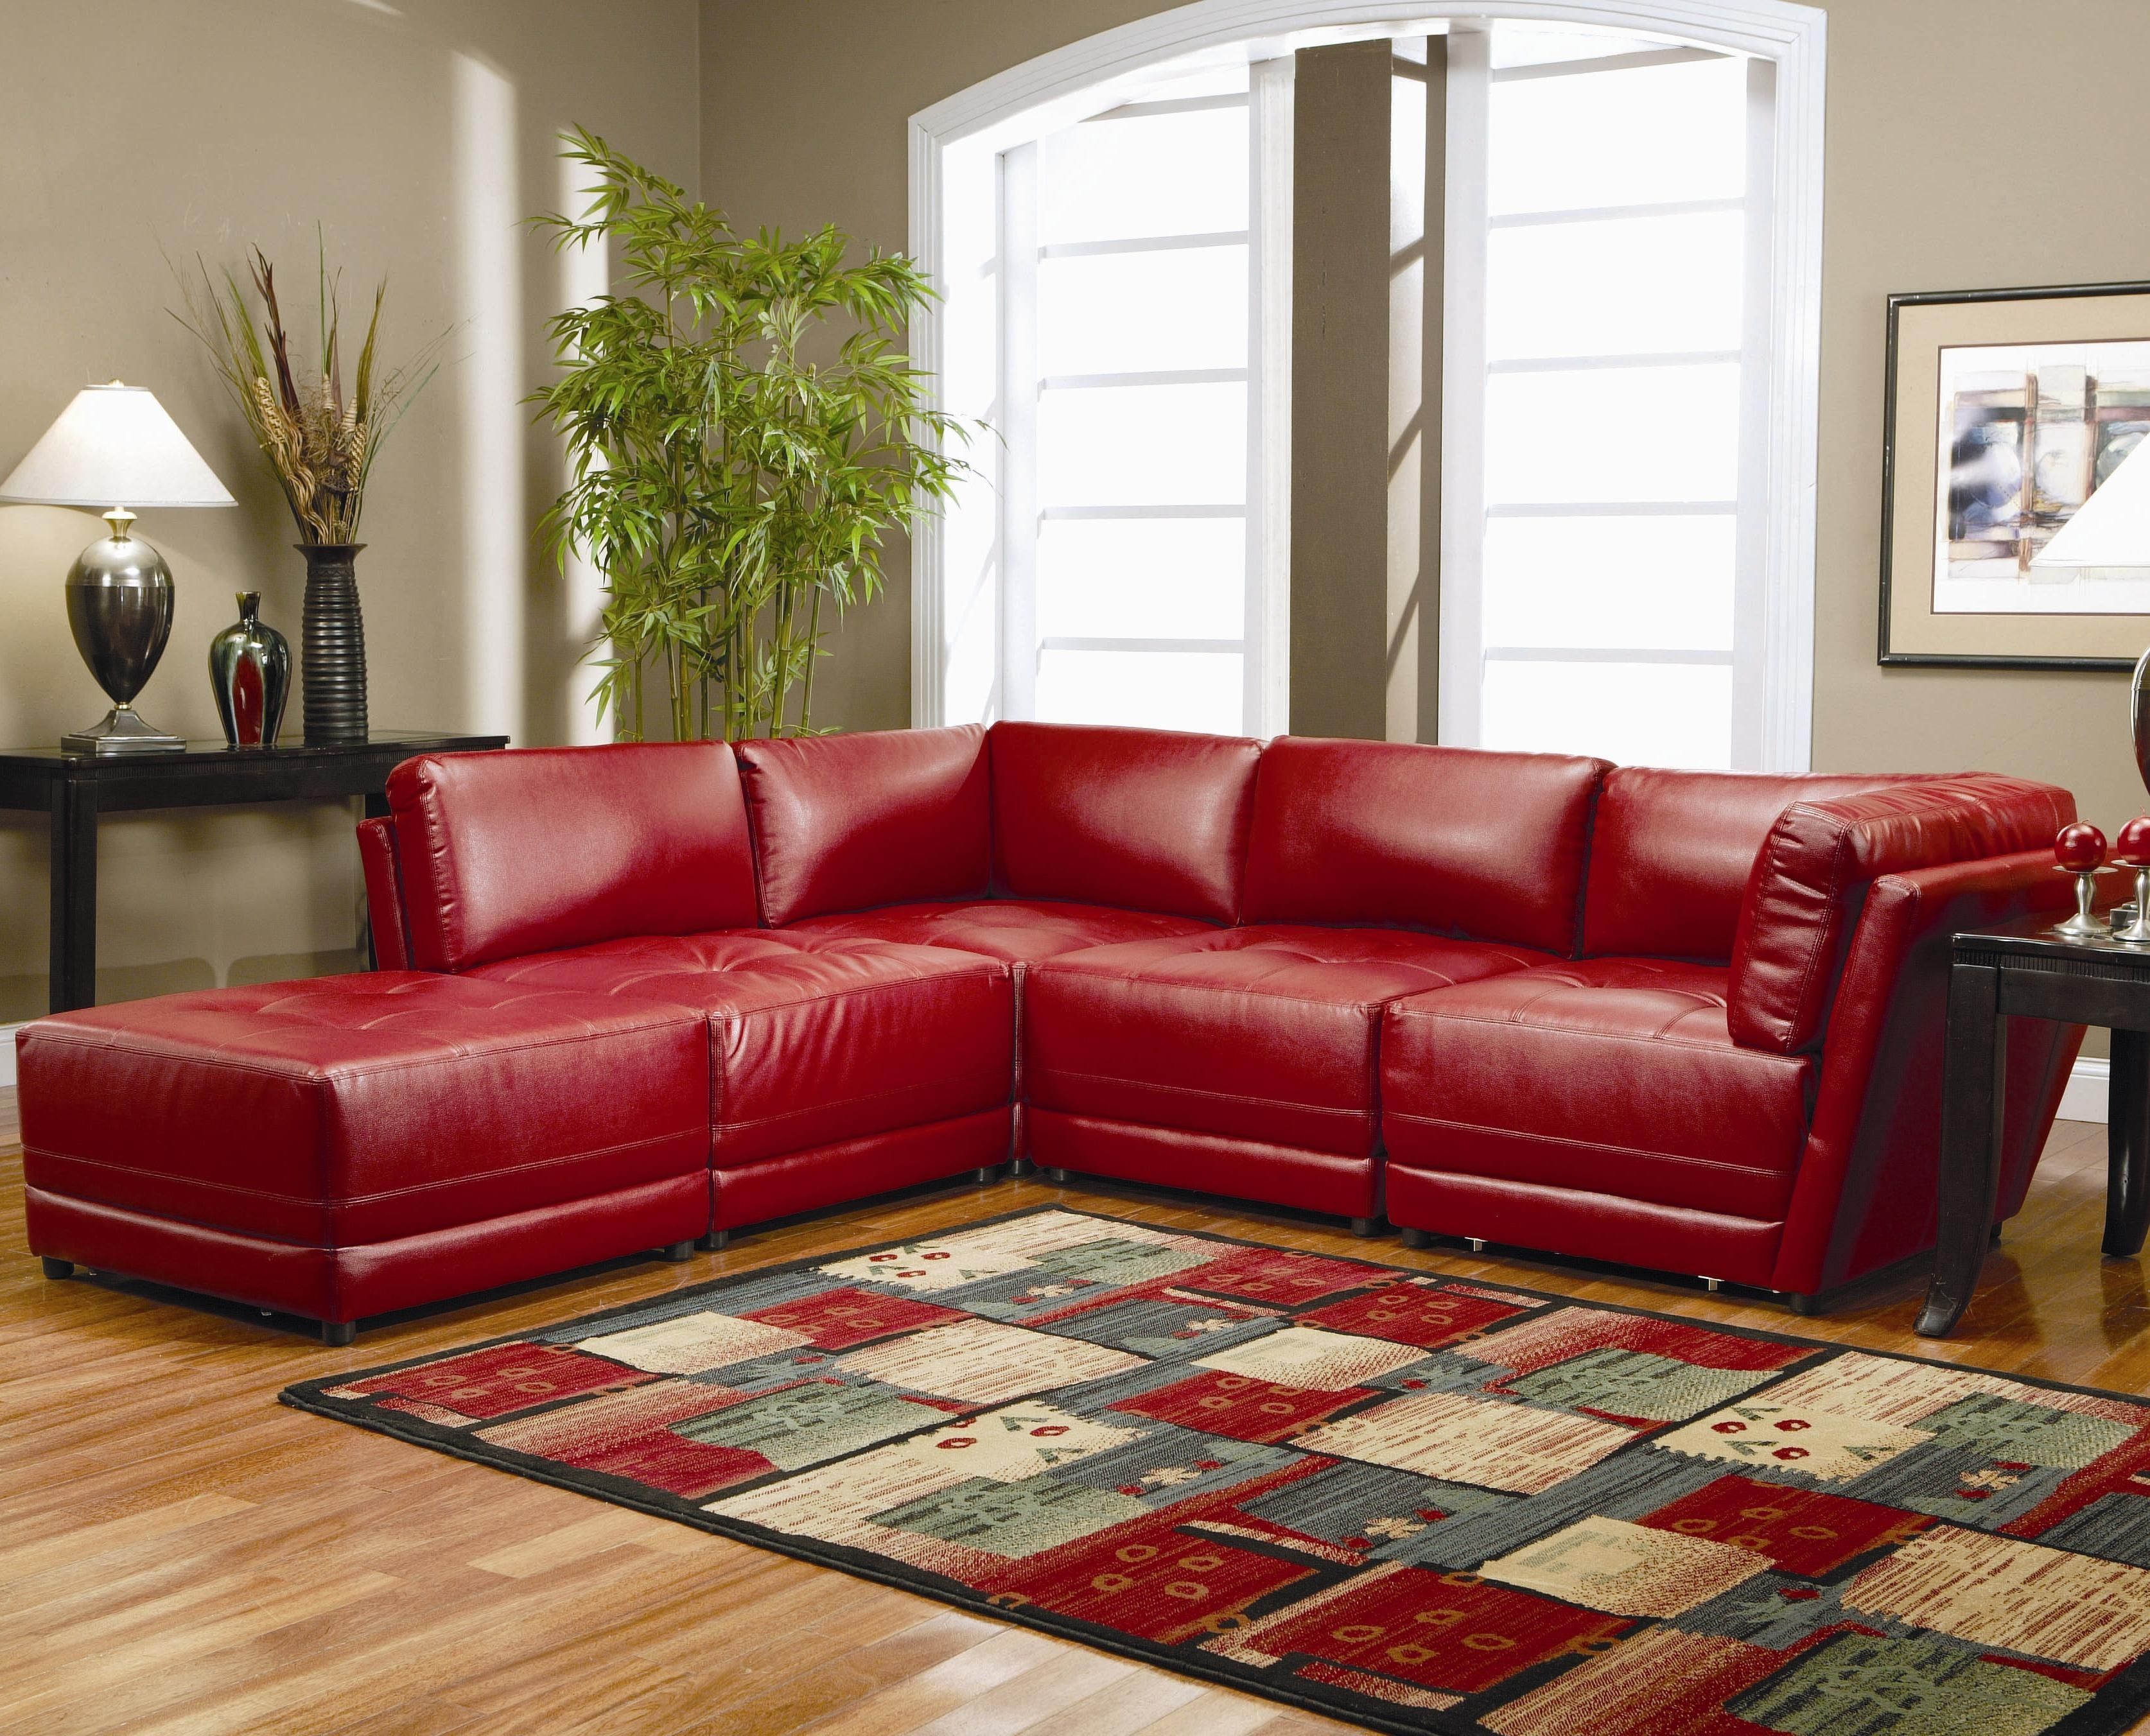 red leather sectional sofa with ottoman